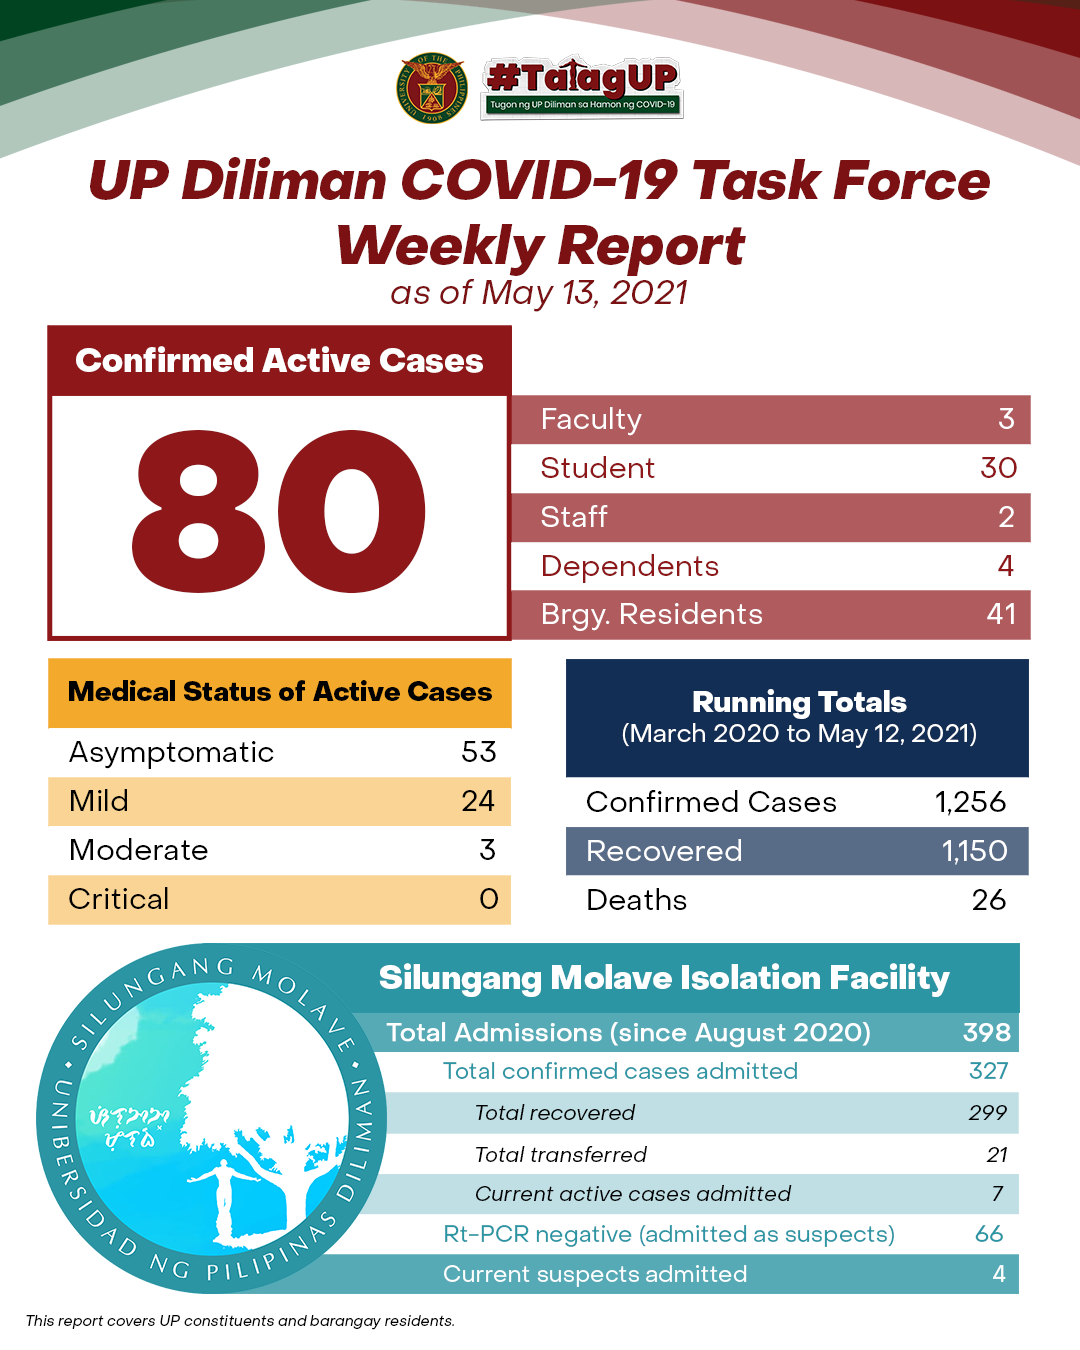 UP Diliman COVID-19 Task Force Weekly Report as of May 13, 2021